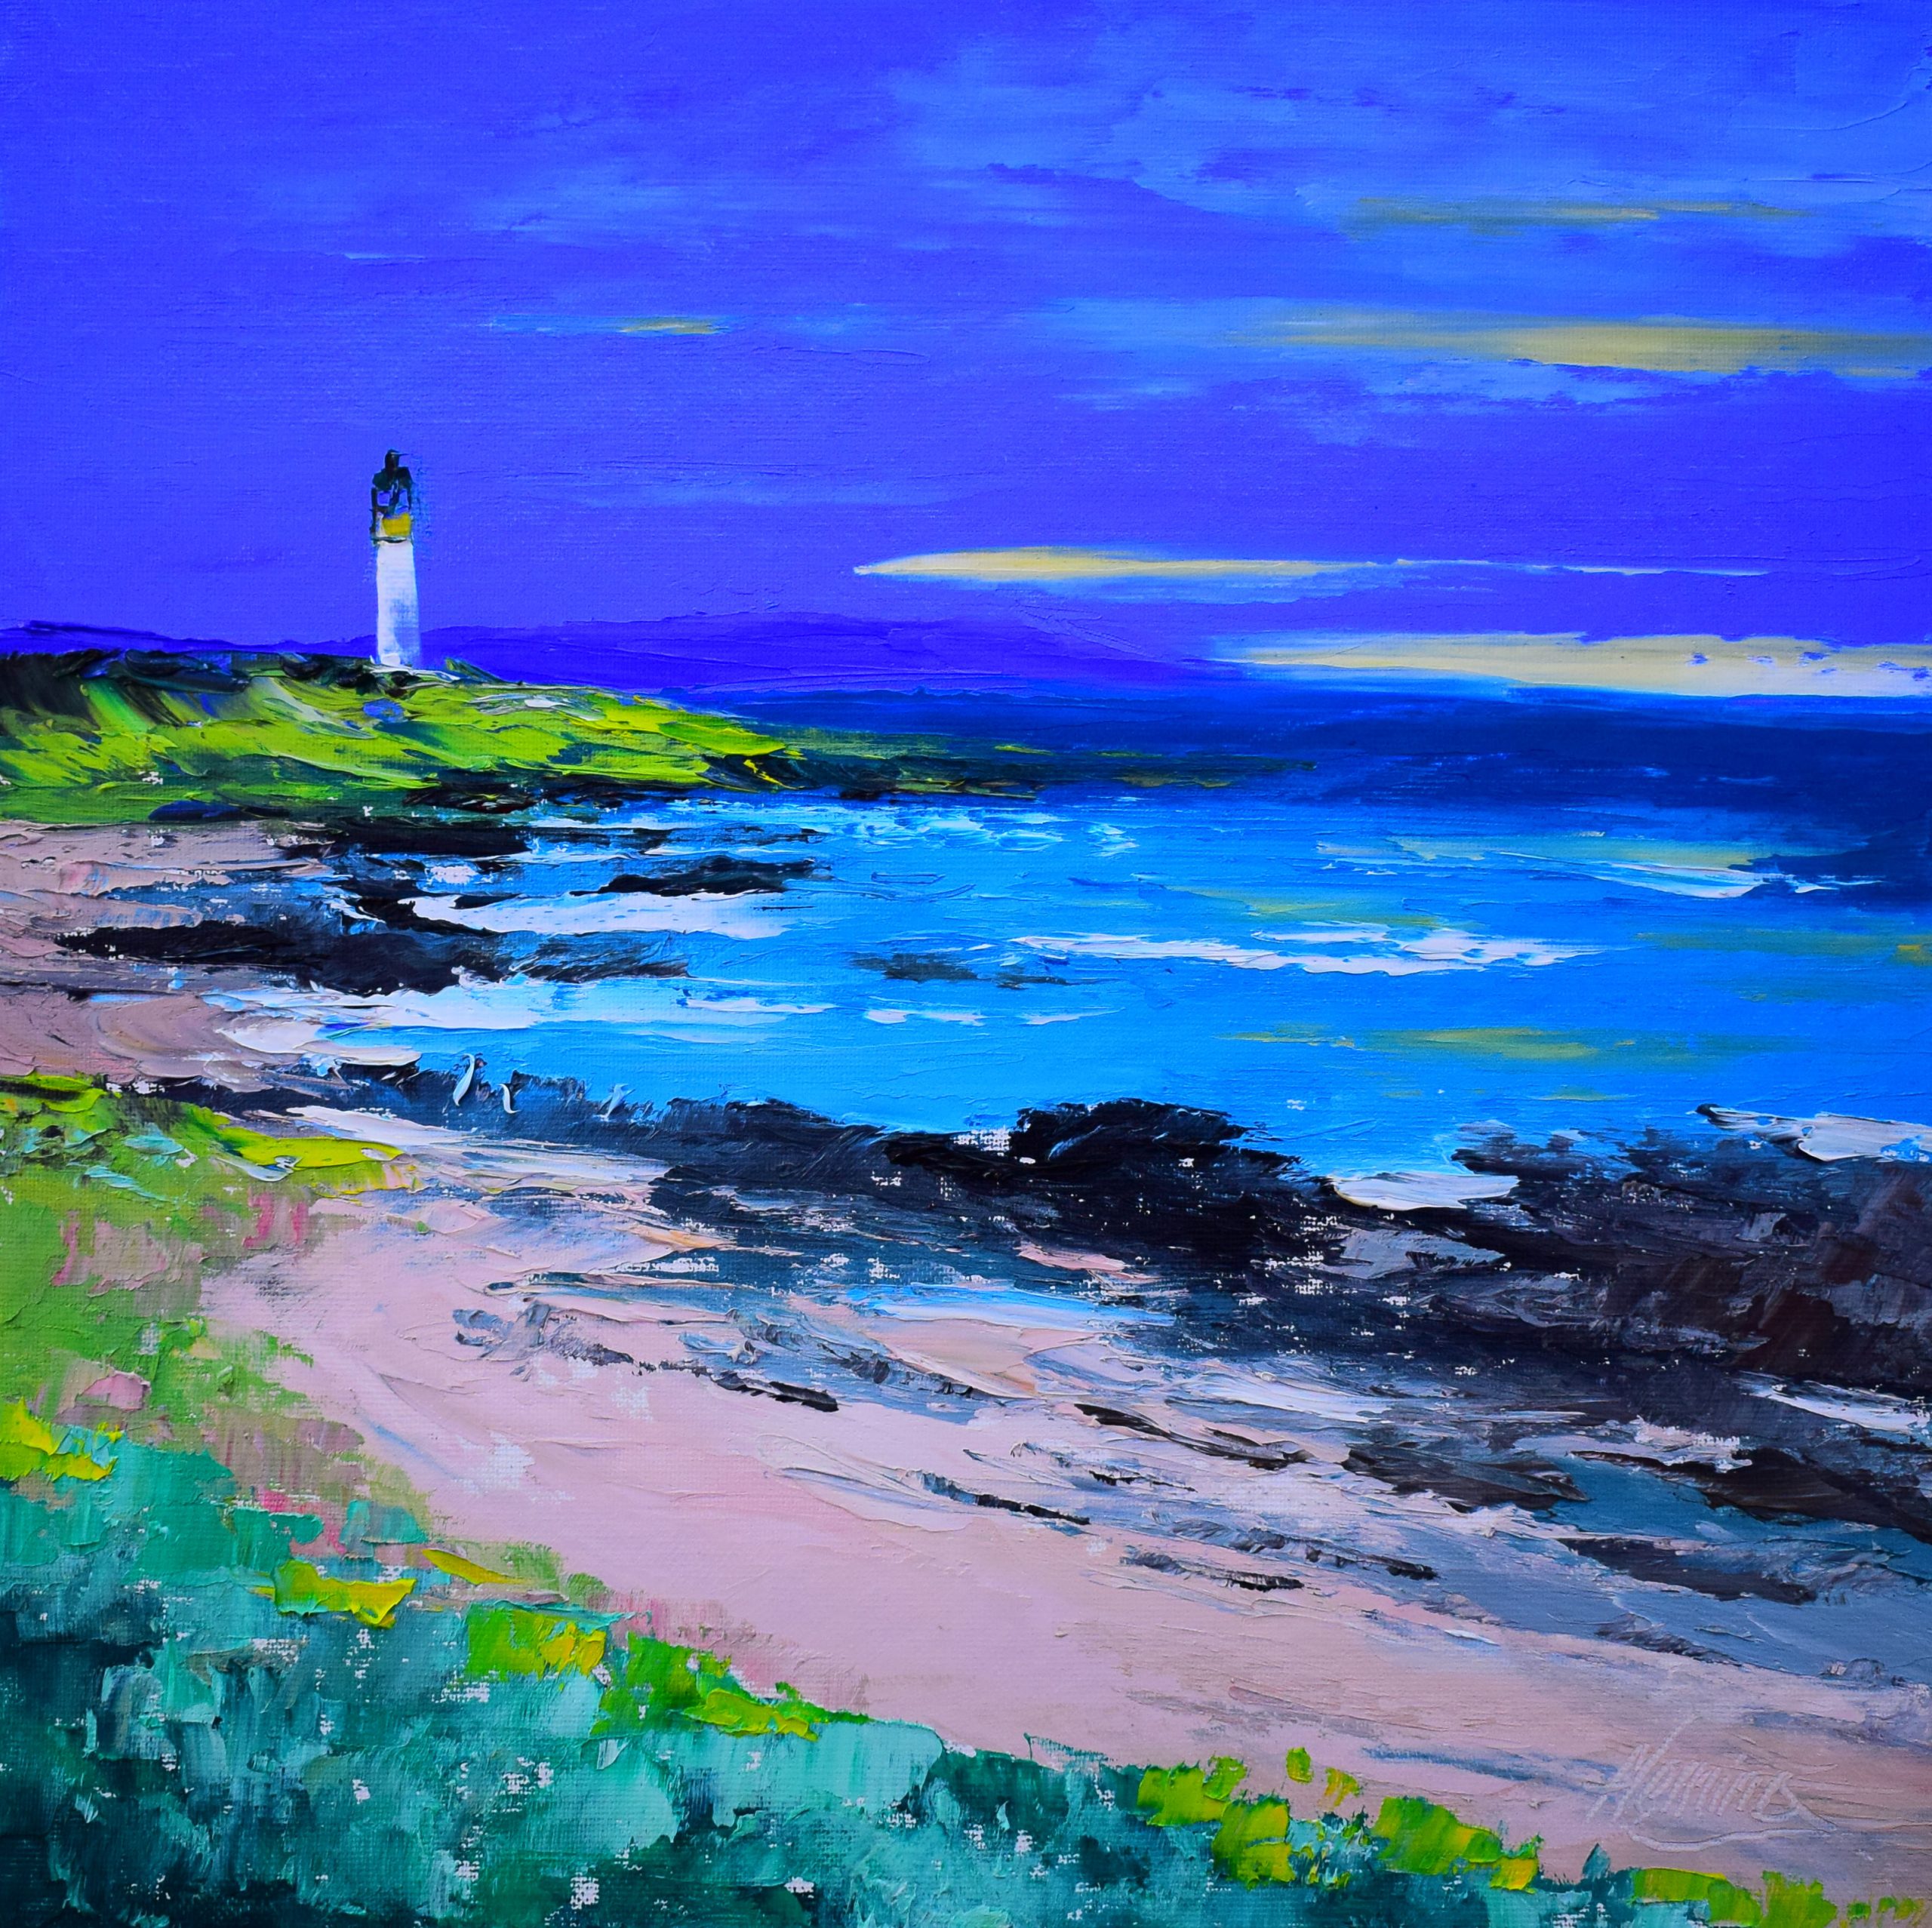 5.Evening, Scurdie Ness Lighthouse, Montrose